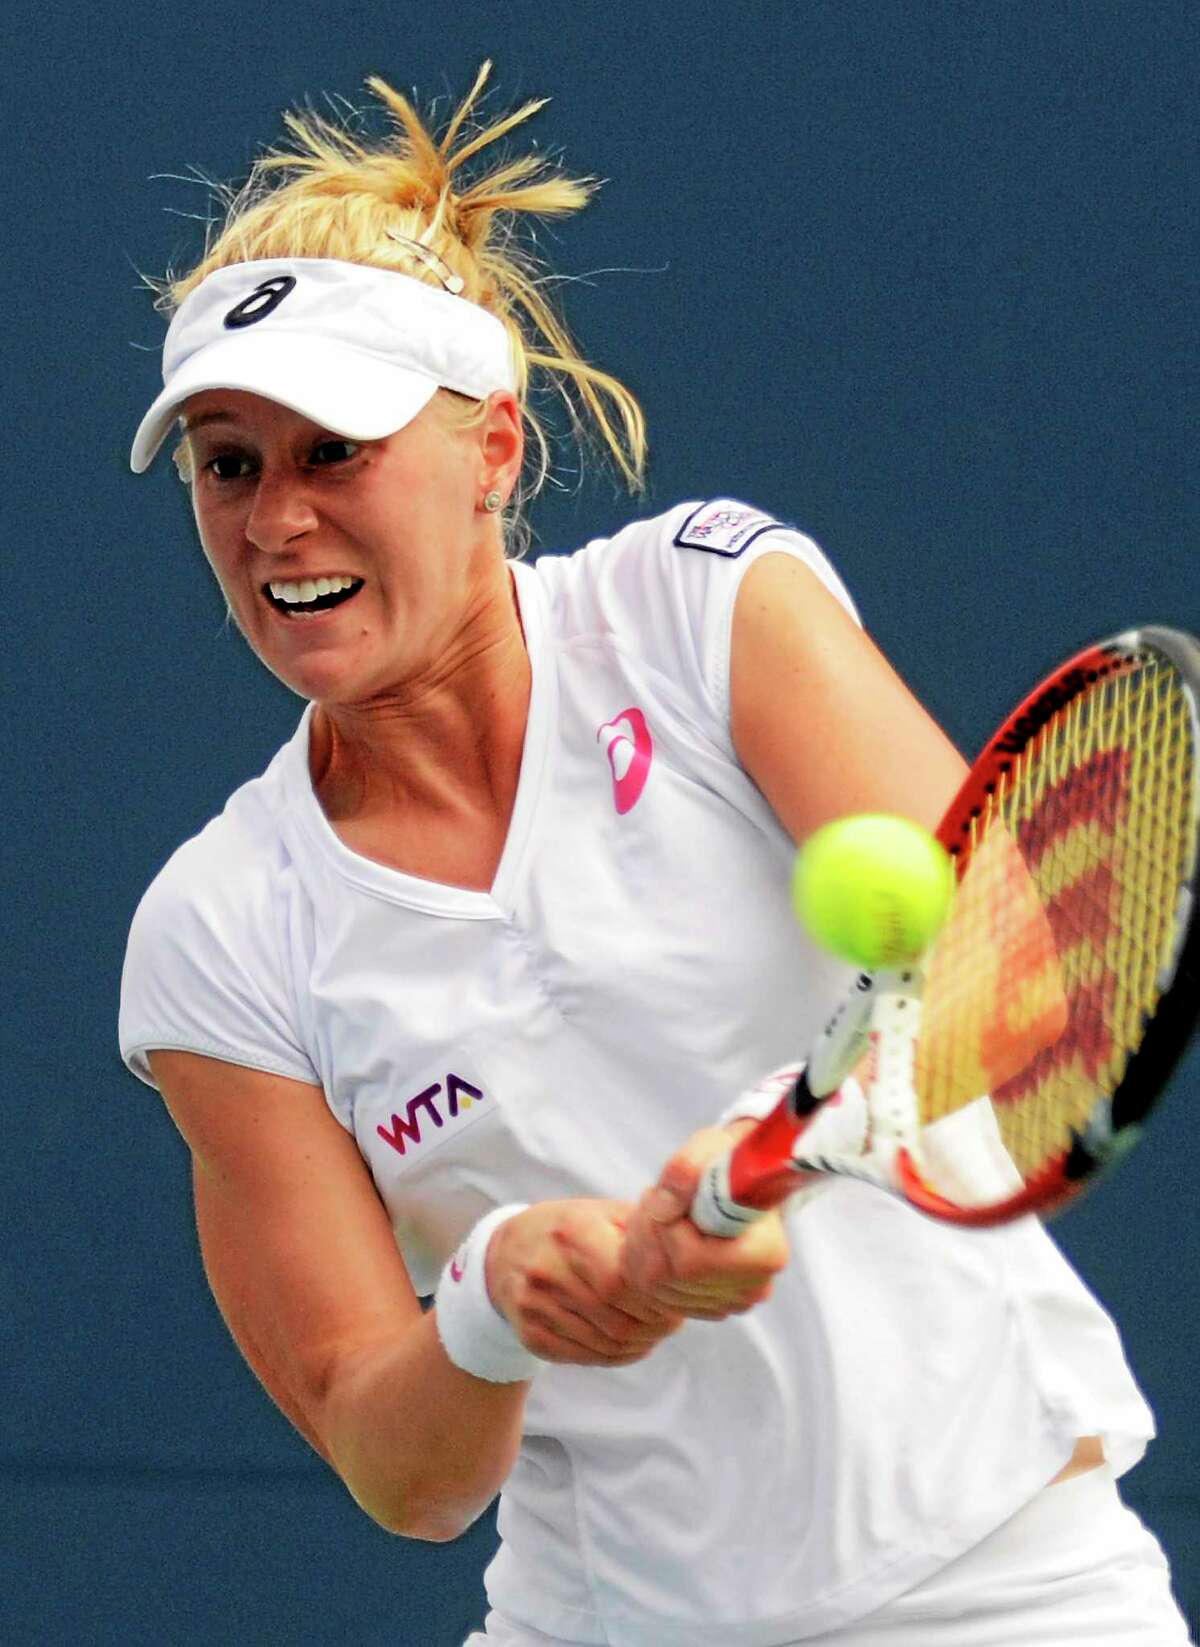 Alison Riske, the final American in the field, was eliminated in the Connecticut Open quarterfinals on Thursday by Magdalena Rybarikova.